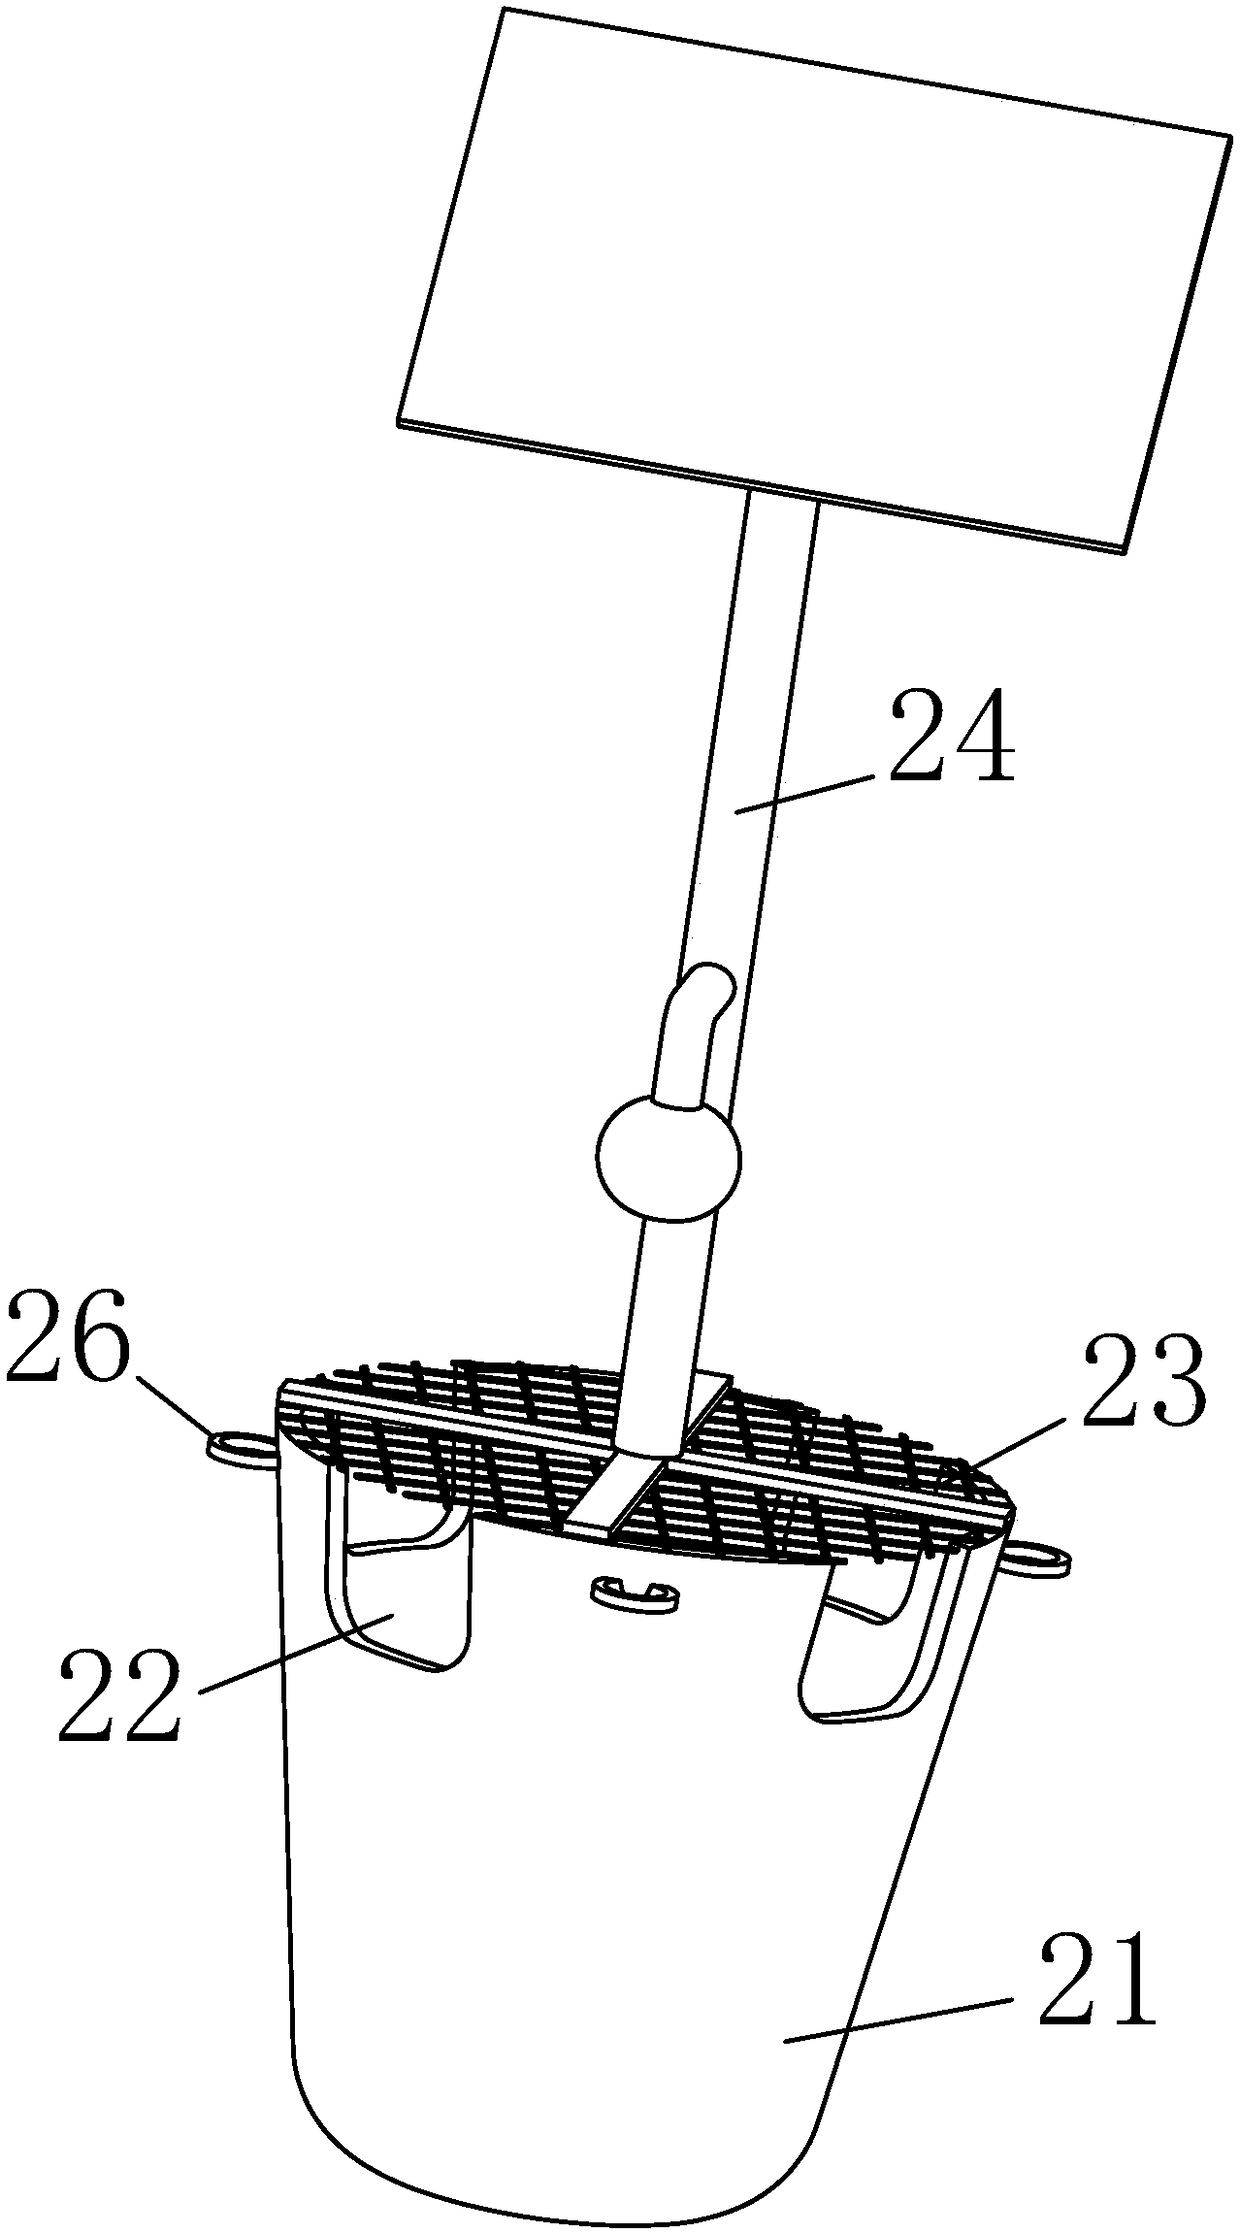 Device and method for stereoscopic breeding of retooning rice and fish